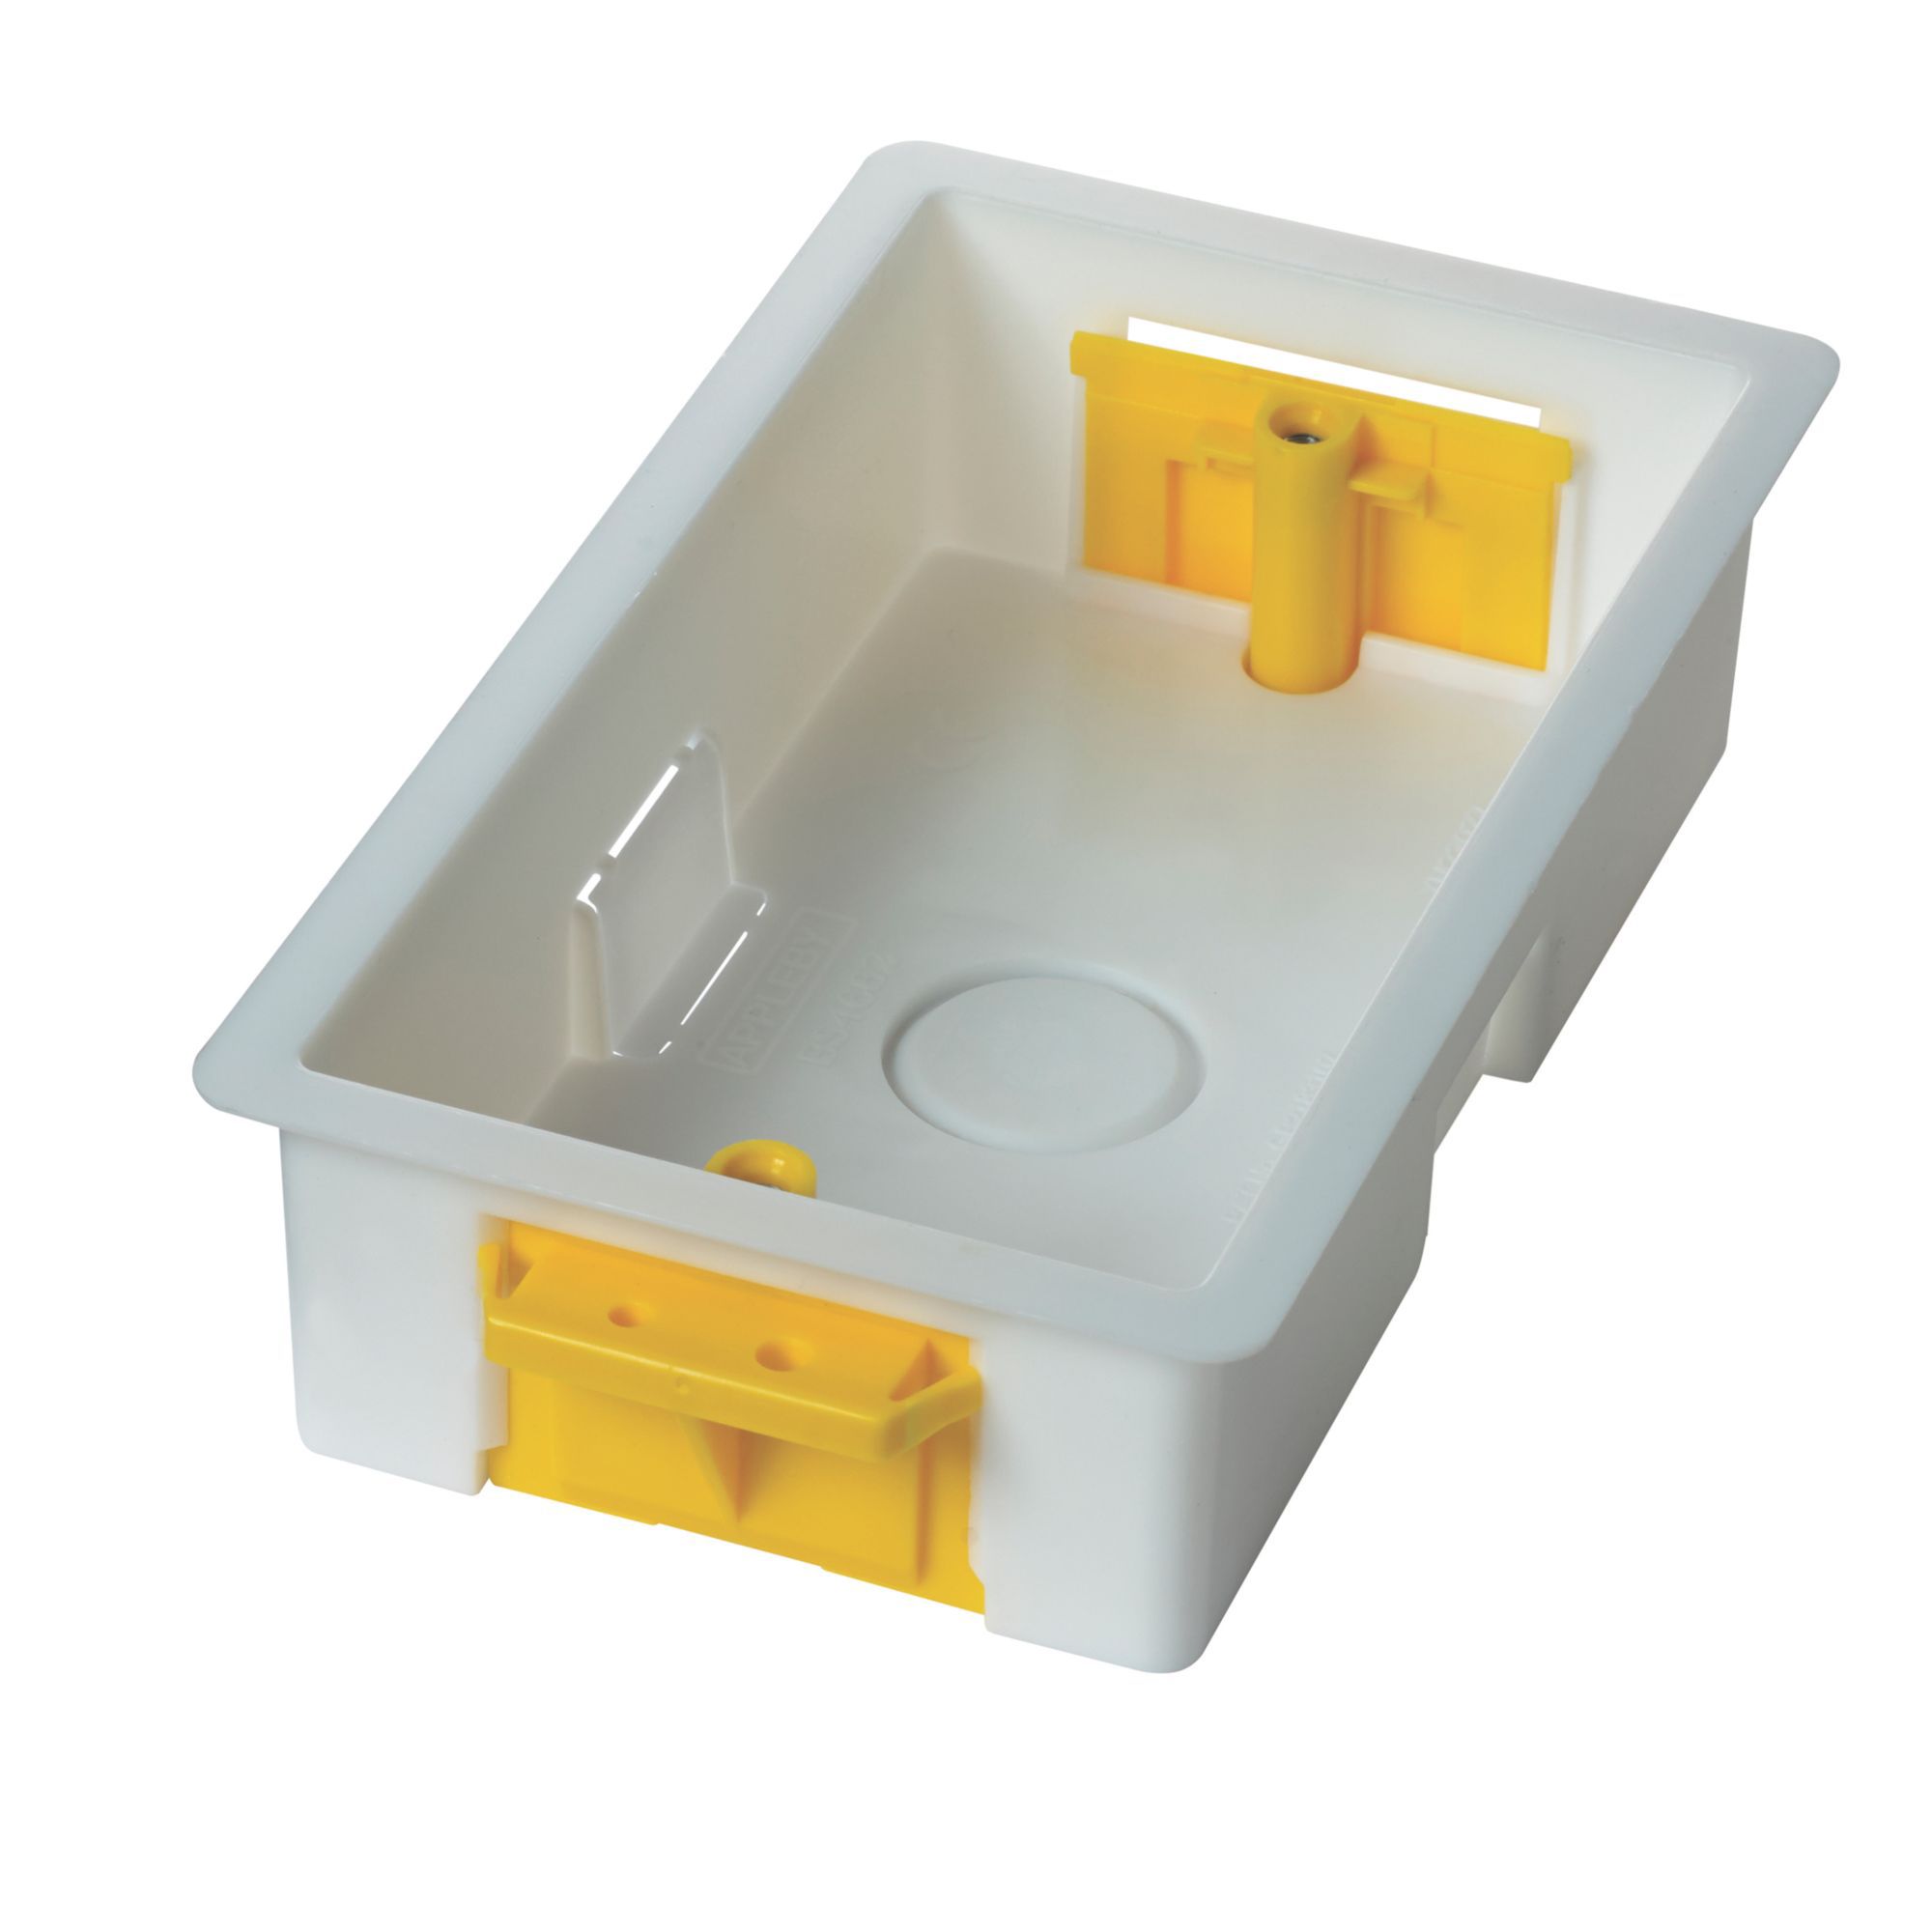 Appleby Polycarbonate 35mm Double Pattress box